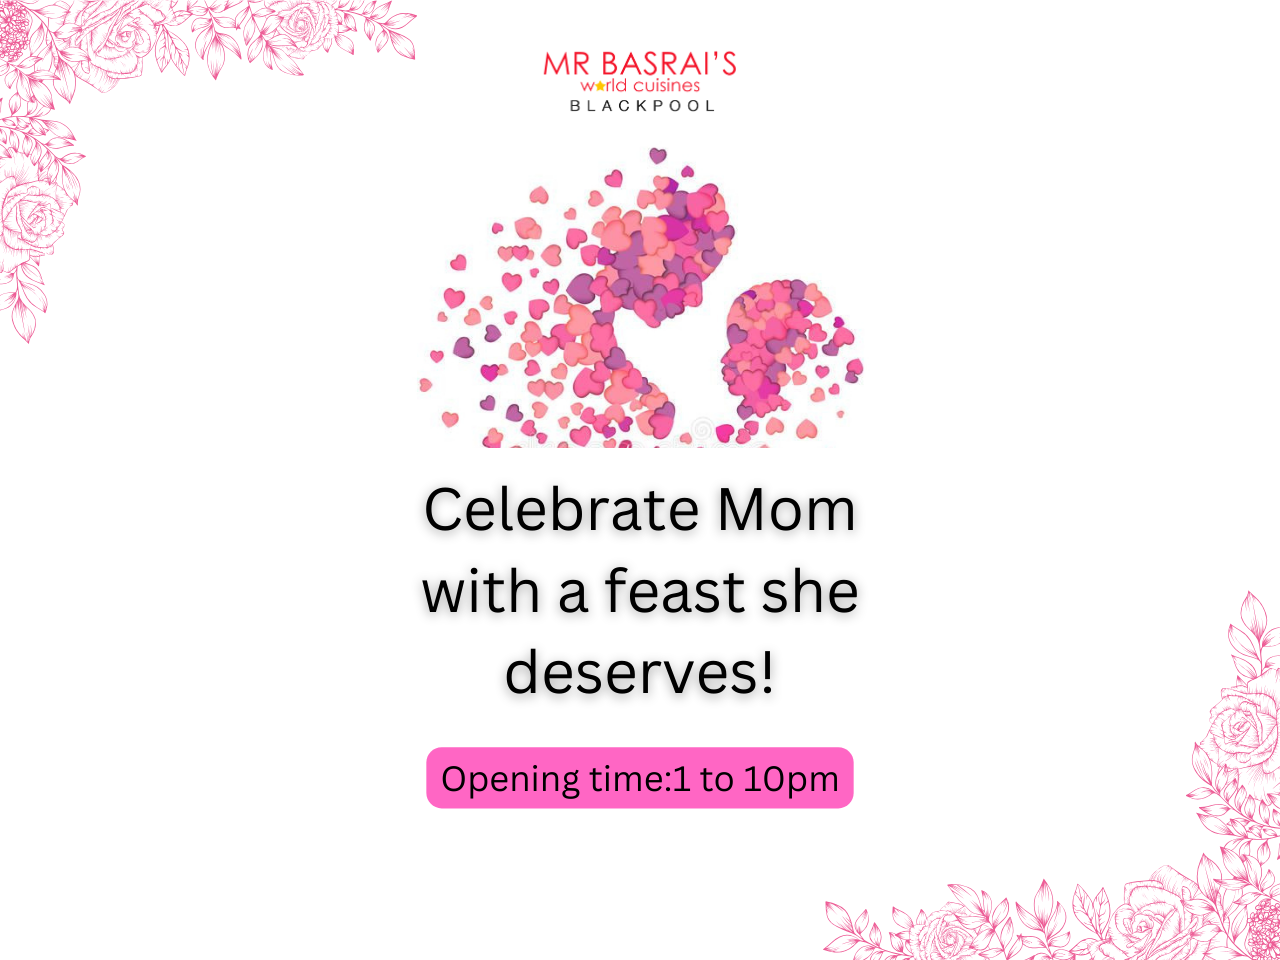 Cheers to Mom: An Unforgettable Mother’s Day Dinner at Mr.Basrai World Cuisines Blackpool